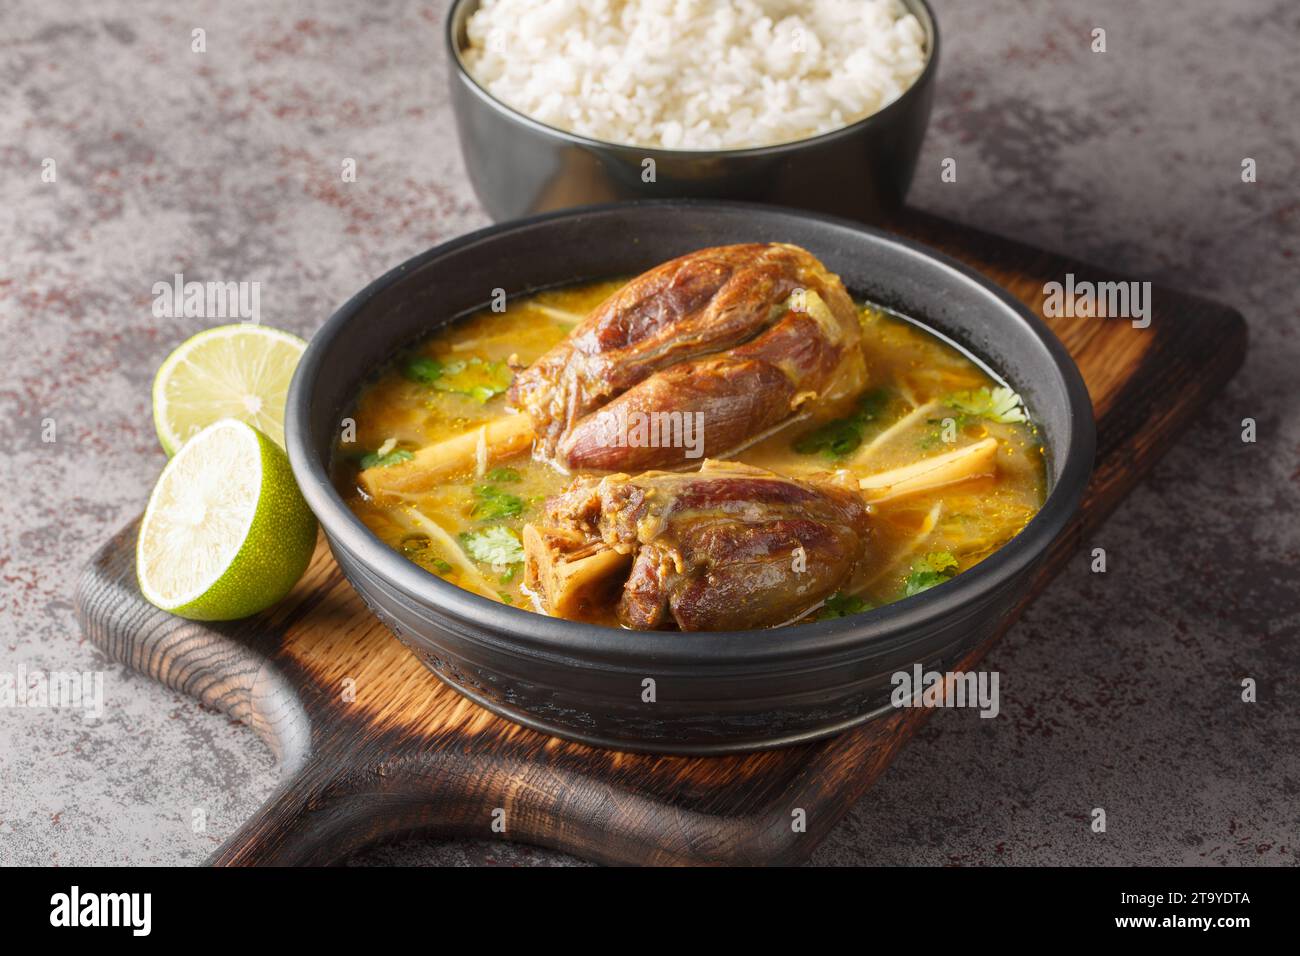 Nalli Nihari Indian Slow cooked Lamb Stew with rice closeup on the wooden board on the table. Horizontal Stock Photo